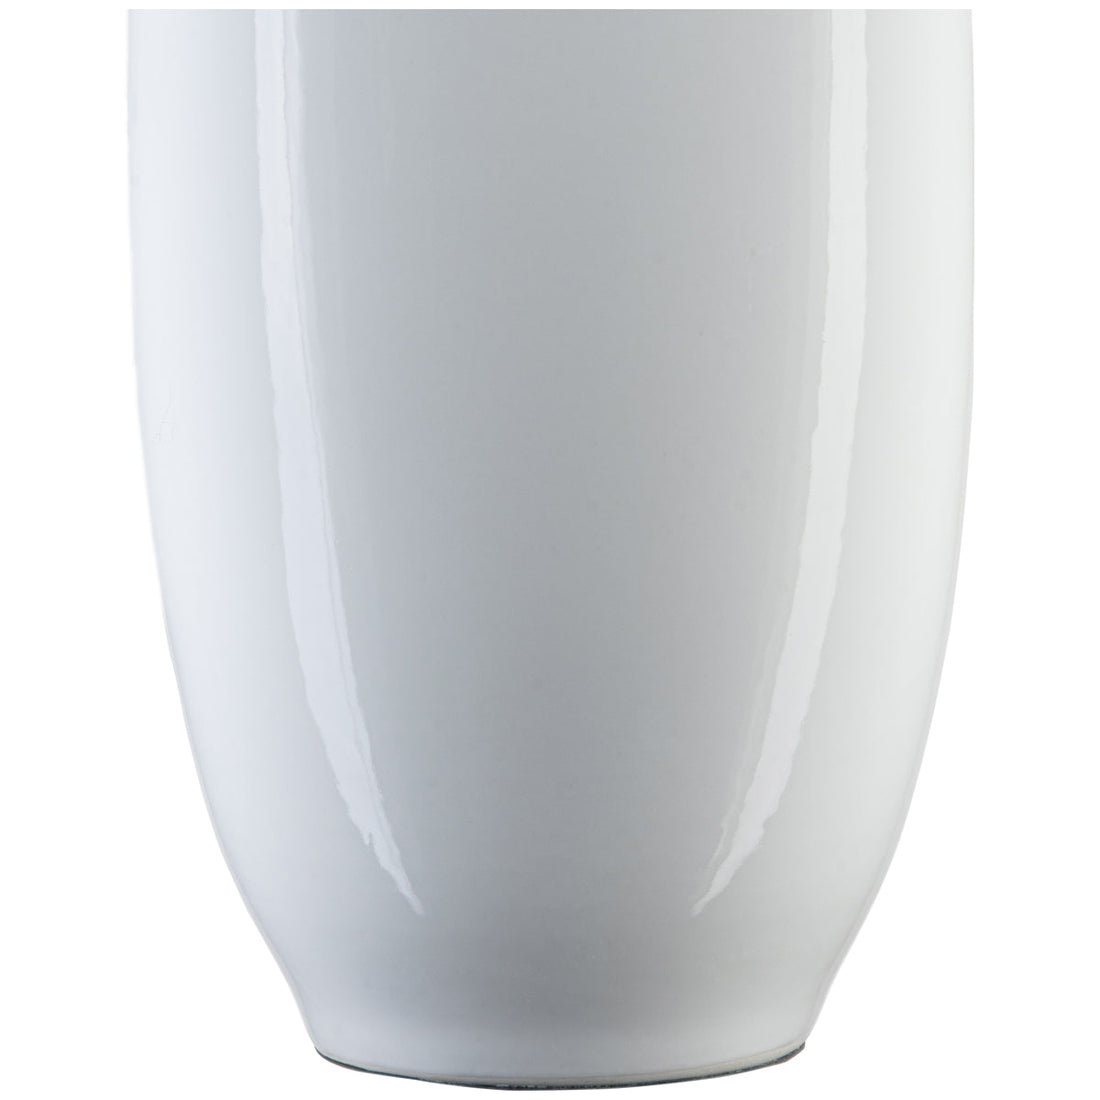 Currey and Company Imperial White Modern Vase